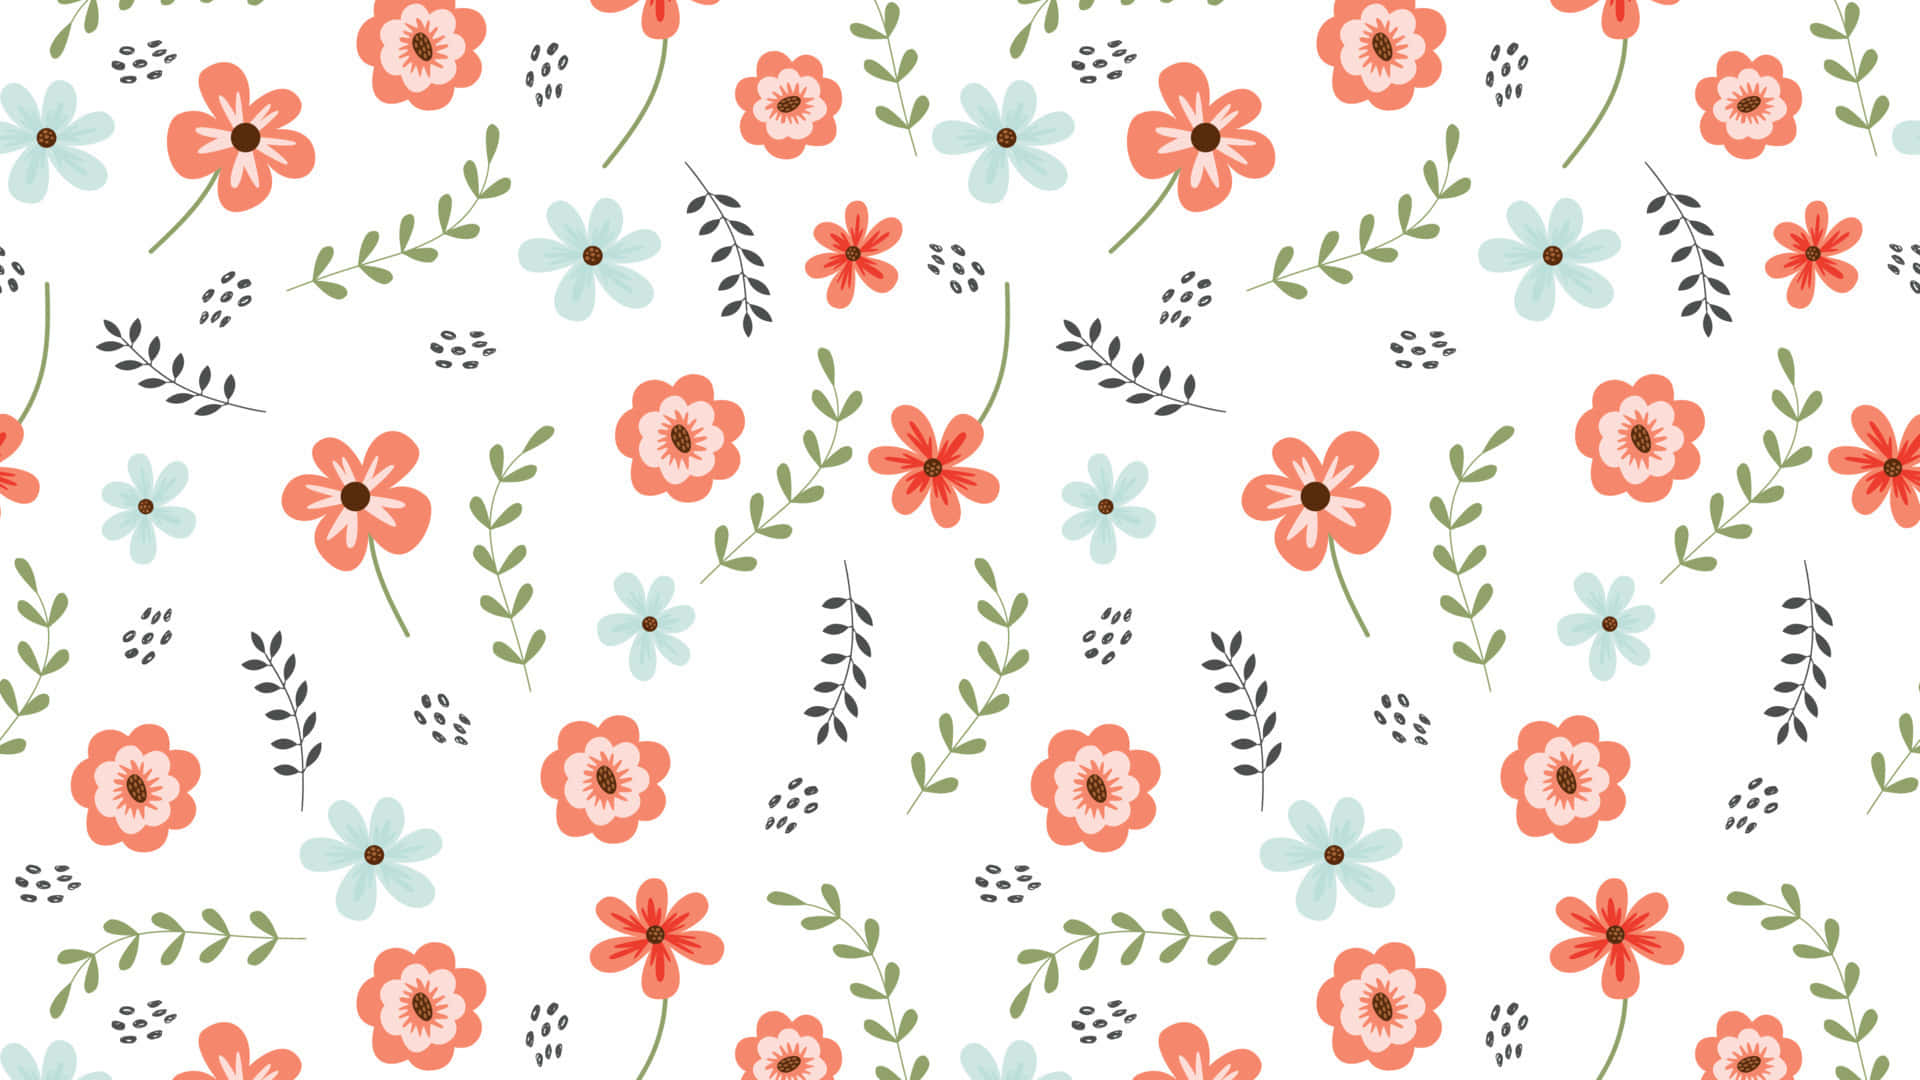 Refreshing Pastel Floral Background Tumblr Style